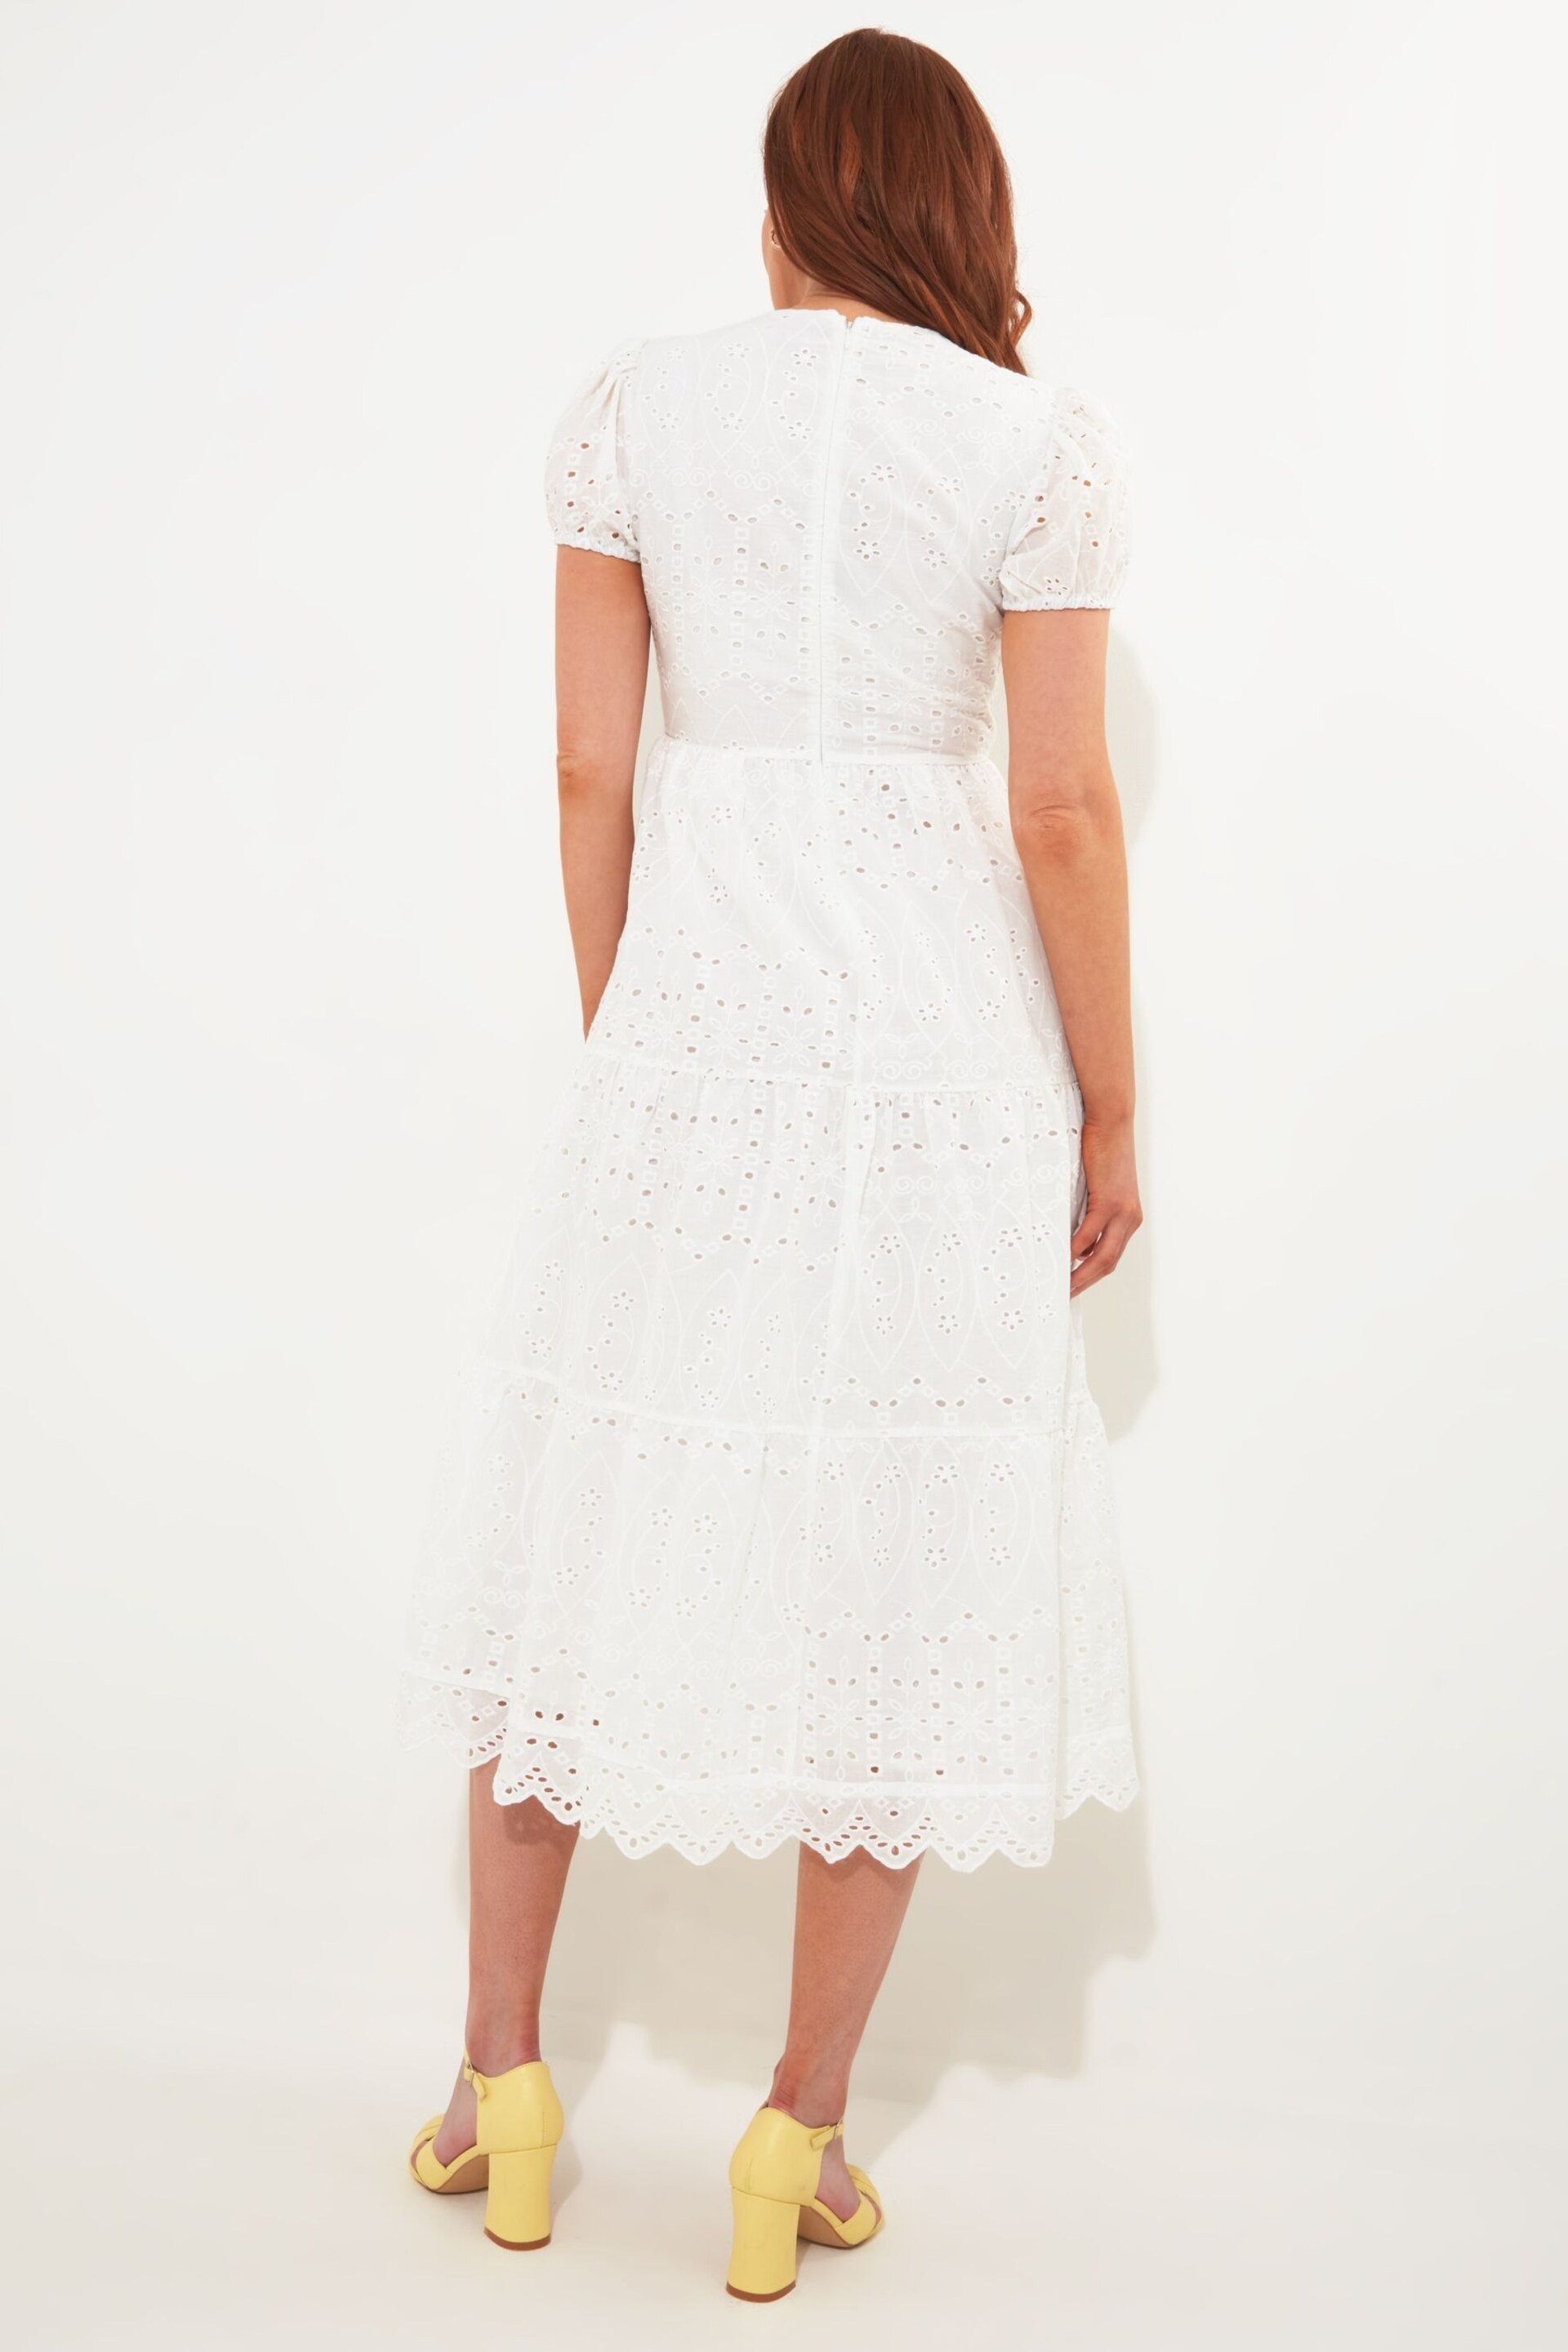 Joe Browns White Wrap Front Scalloped Edge Broderie Midi Dress - Image 3 of 5